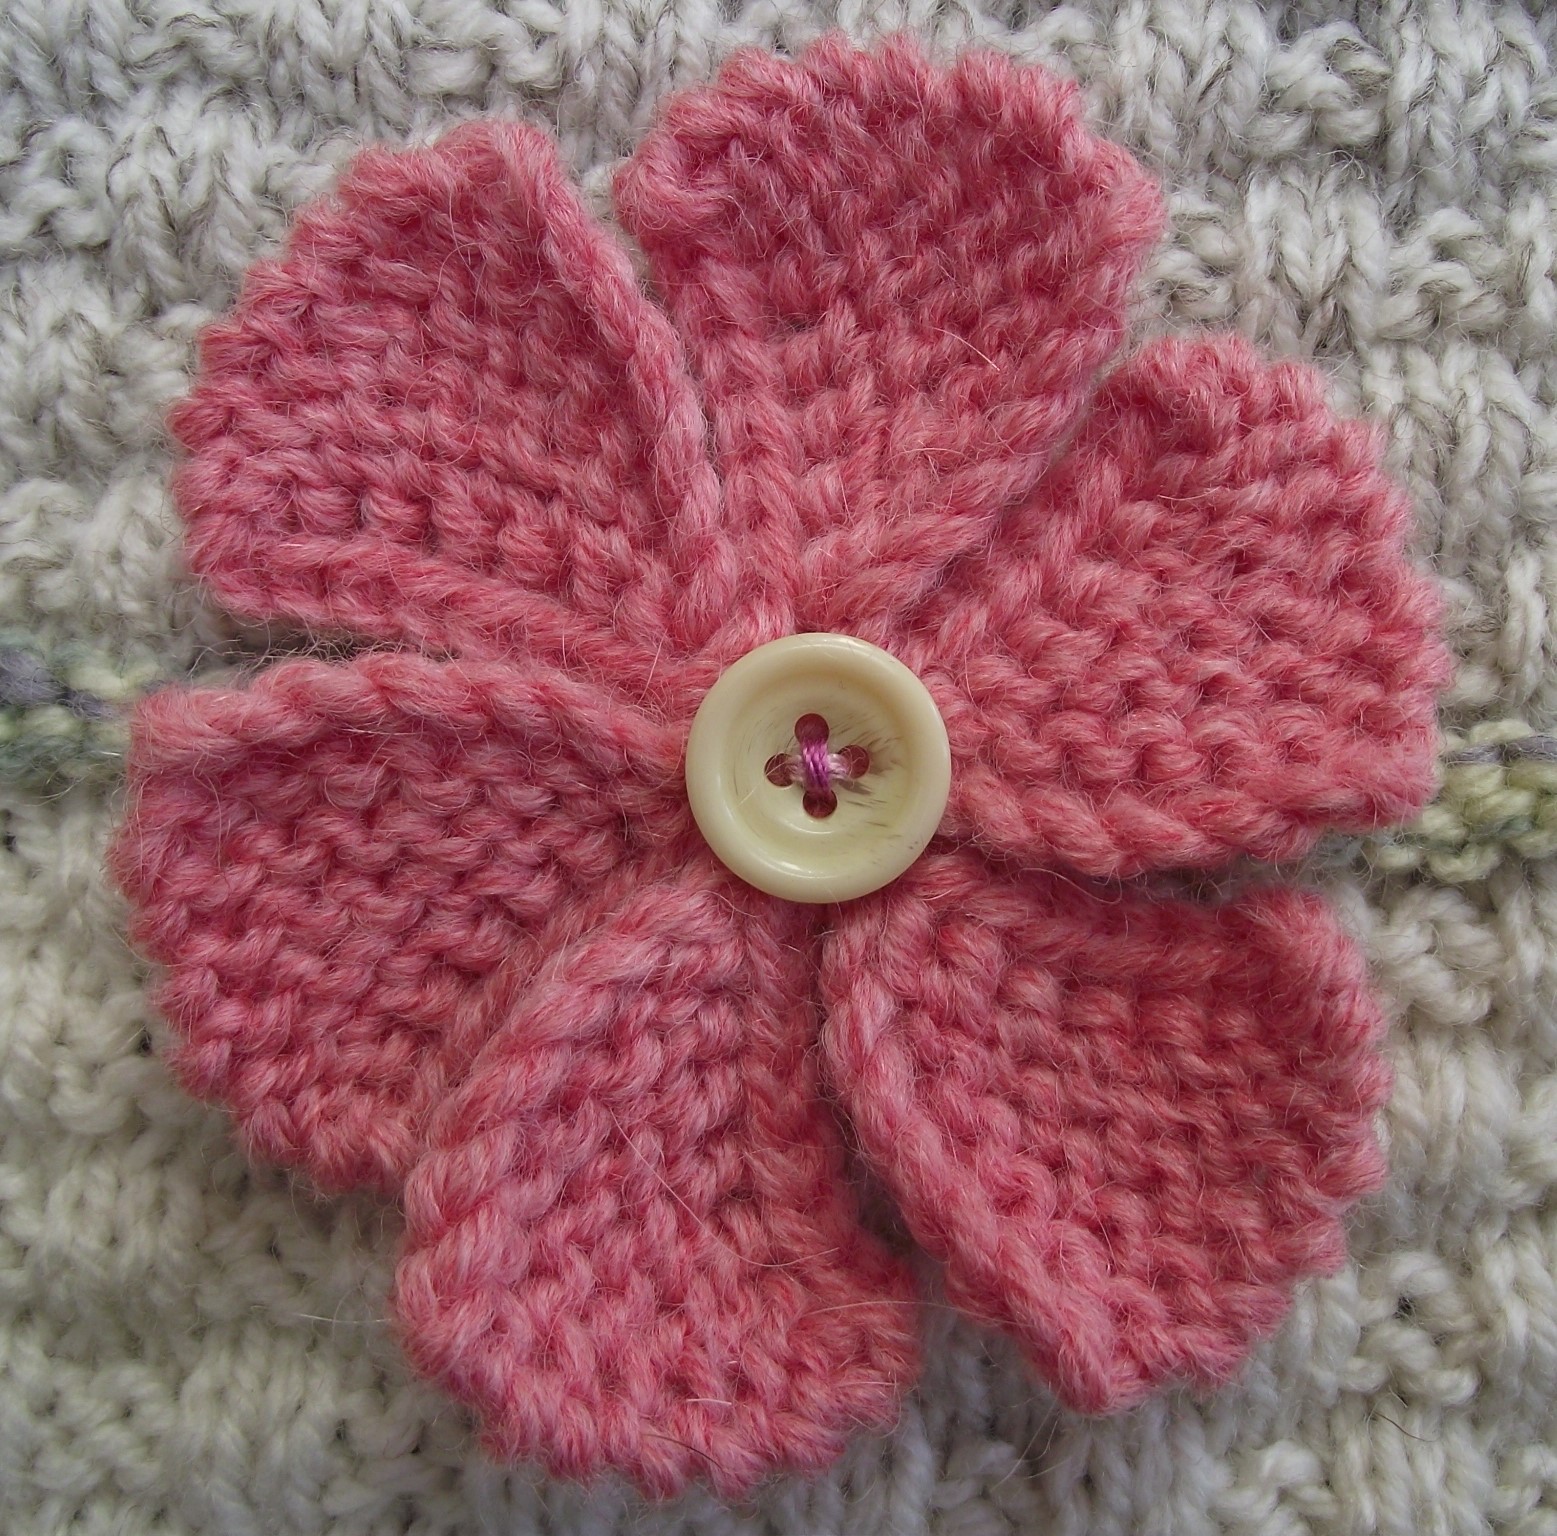 Lizzie Lenard Vintage Sewing: How To Knit A Flower